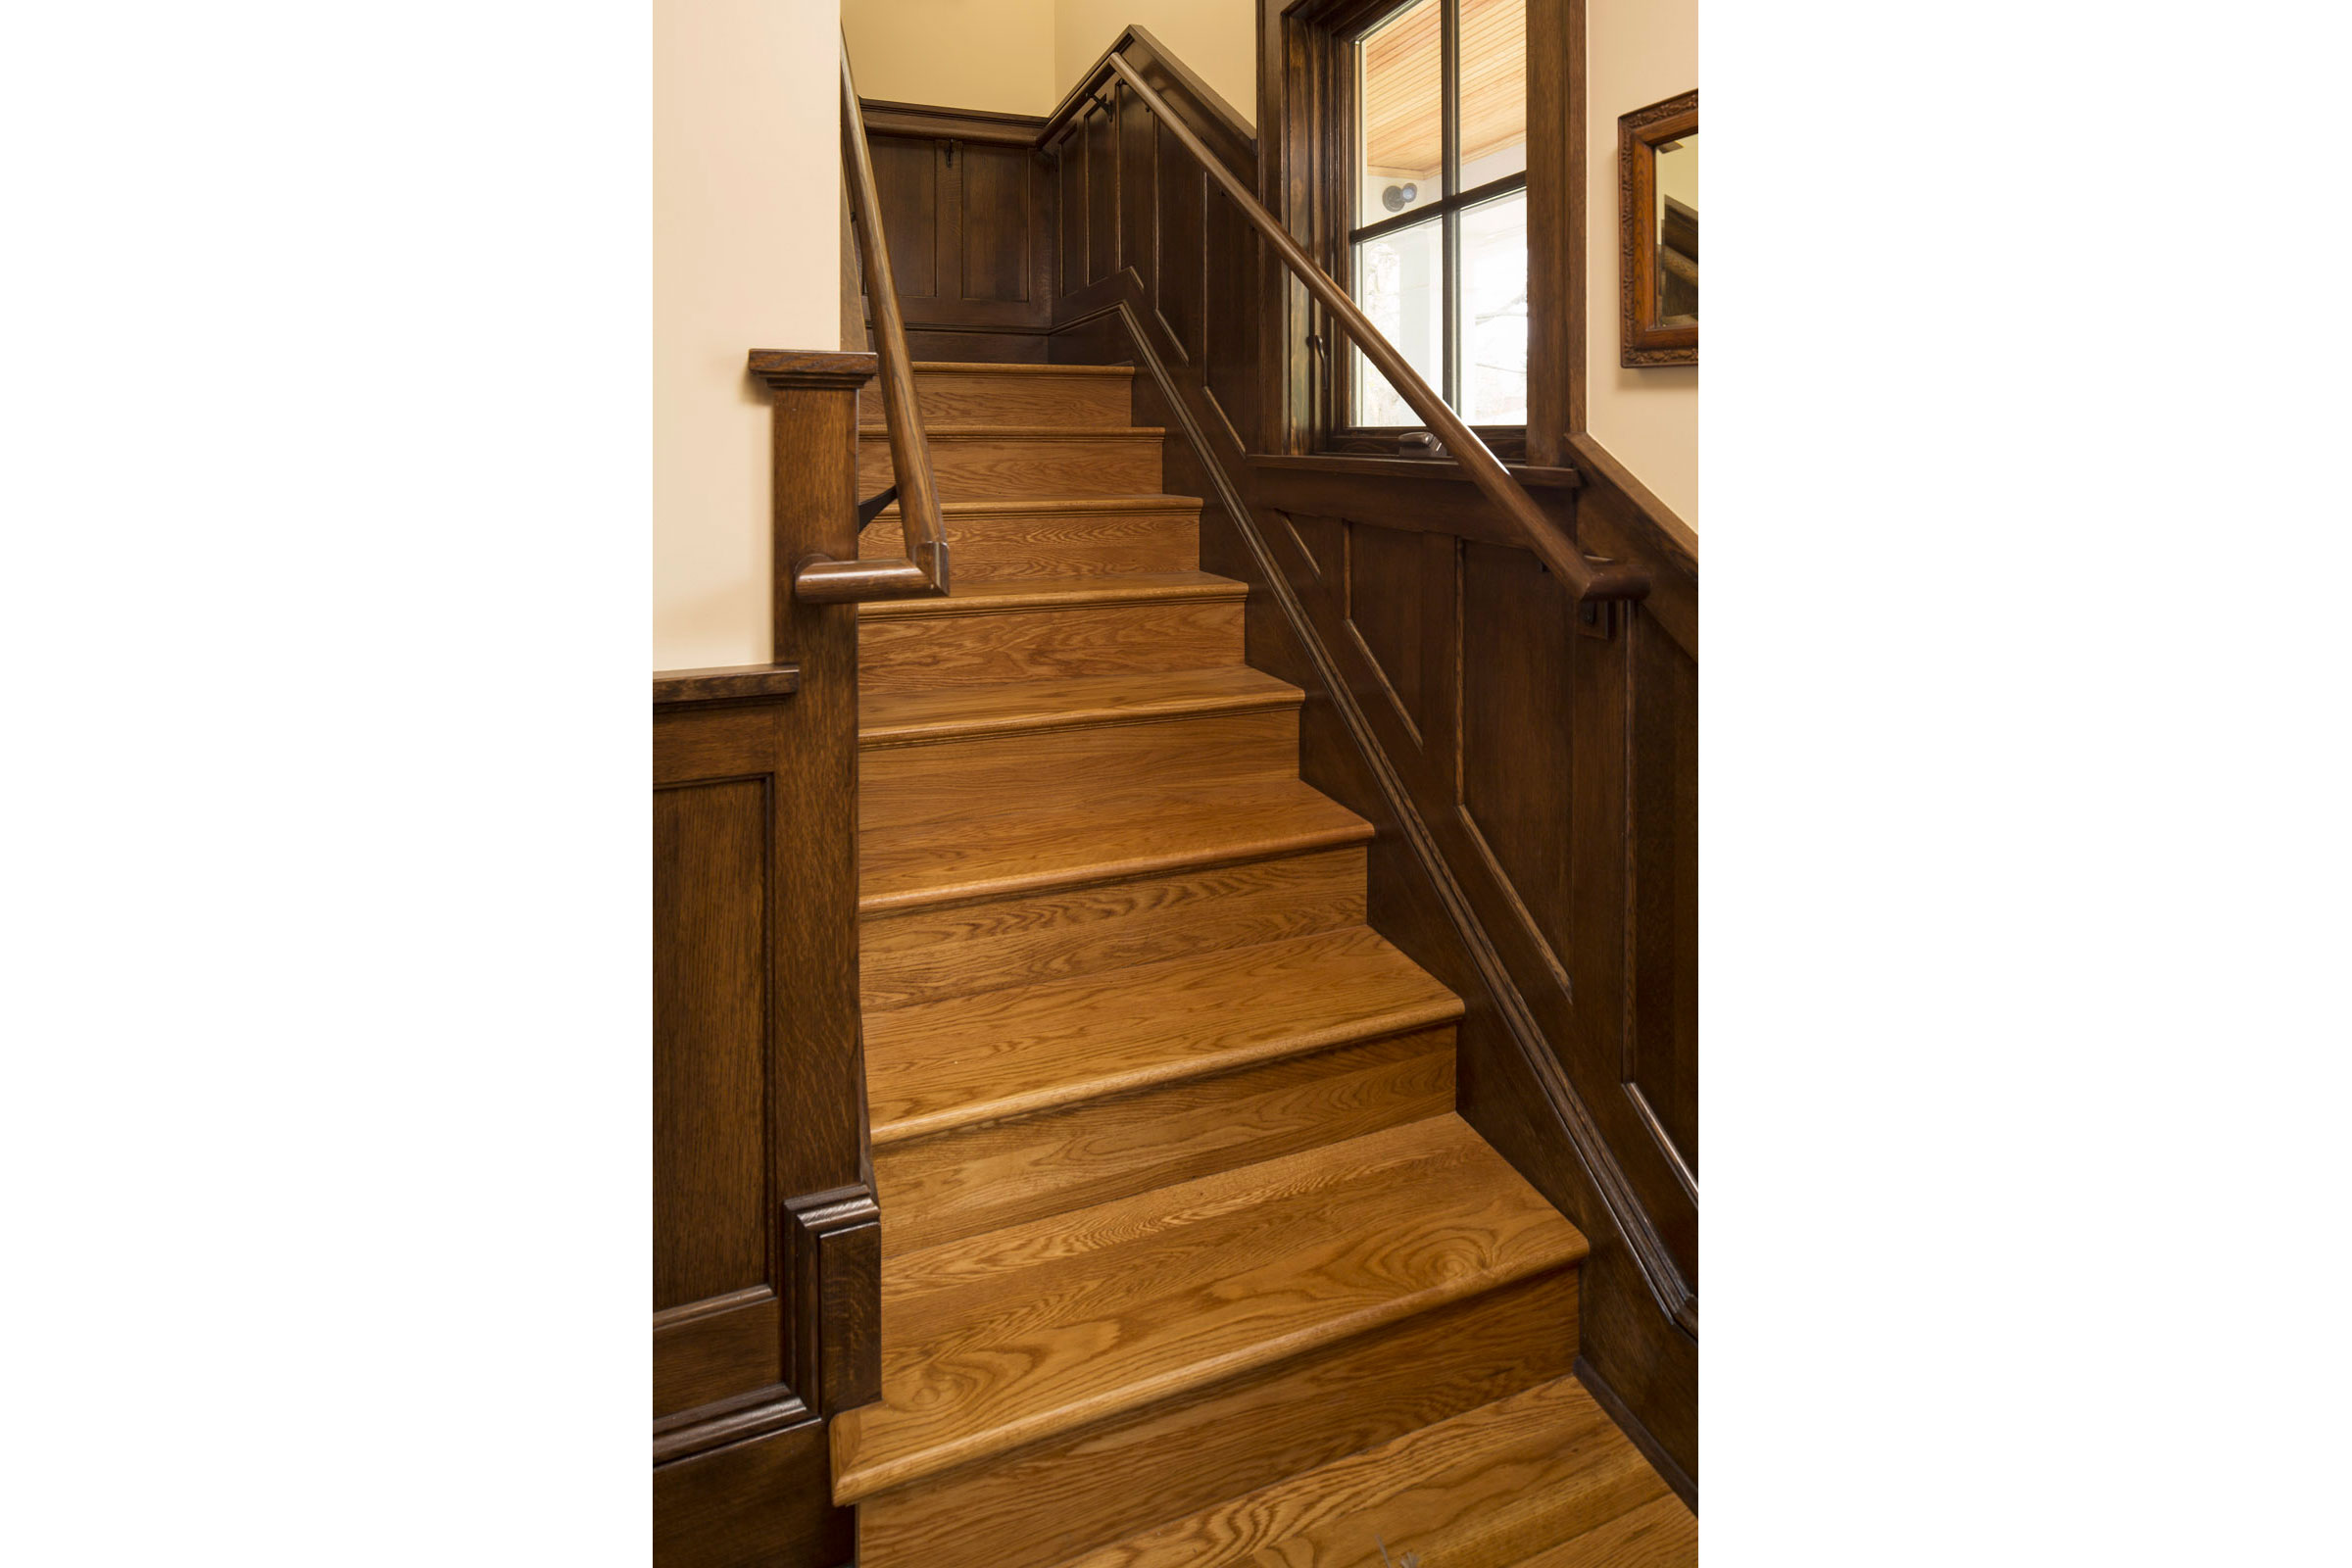 Stair Wrapping Around Elevator with Quartersawn Oak Wainscoting